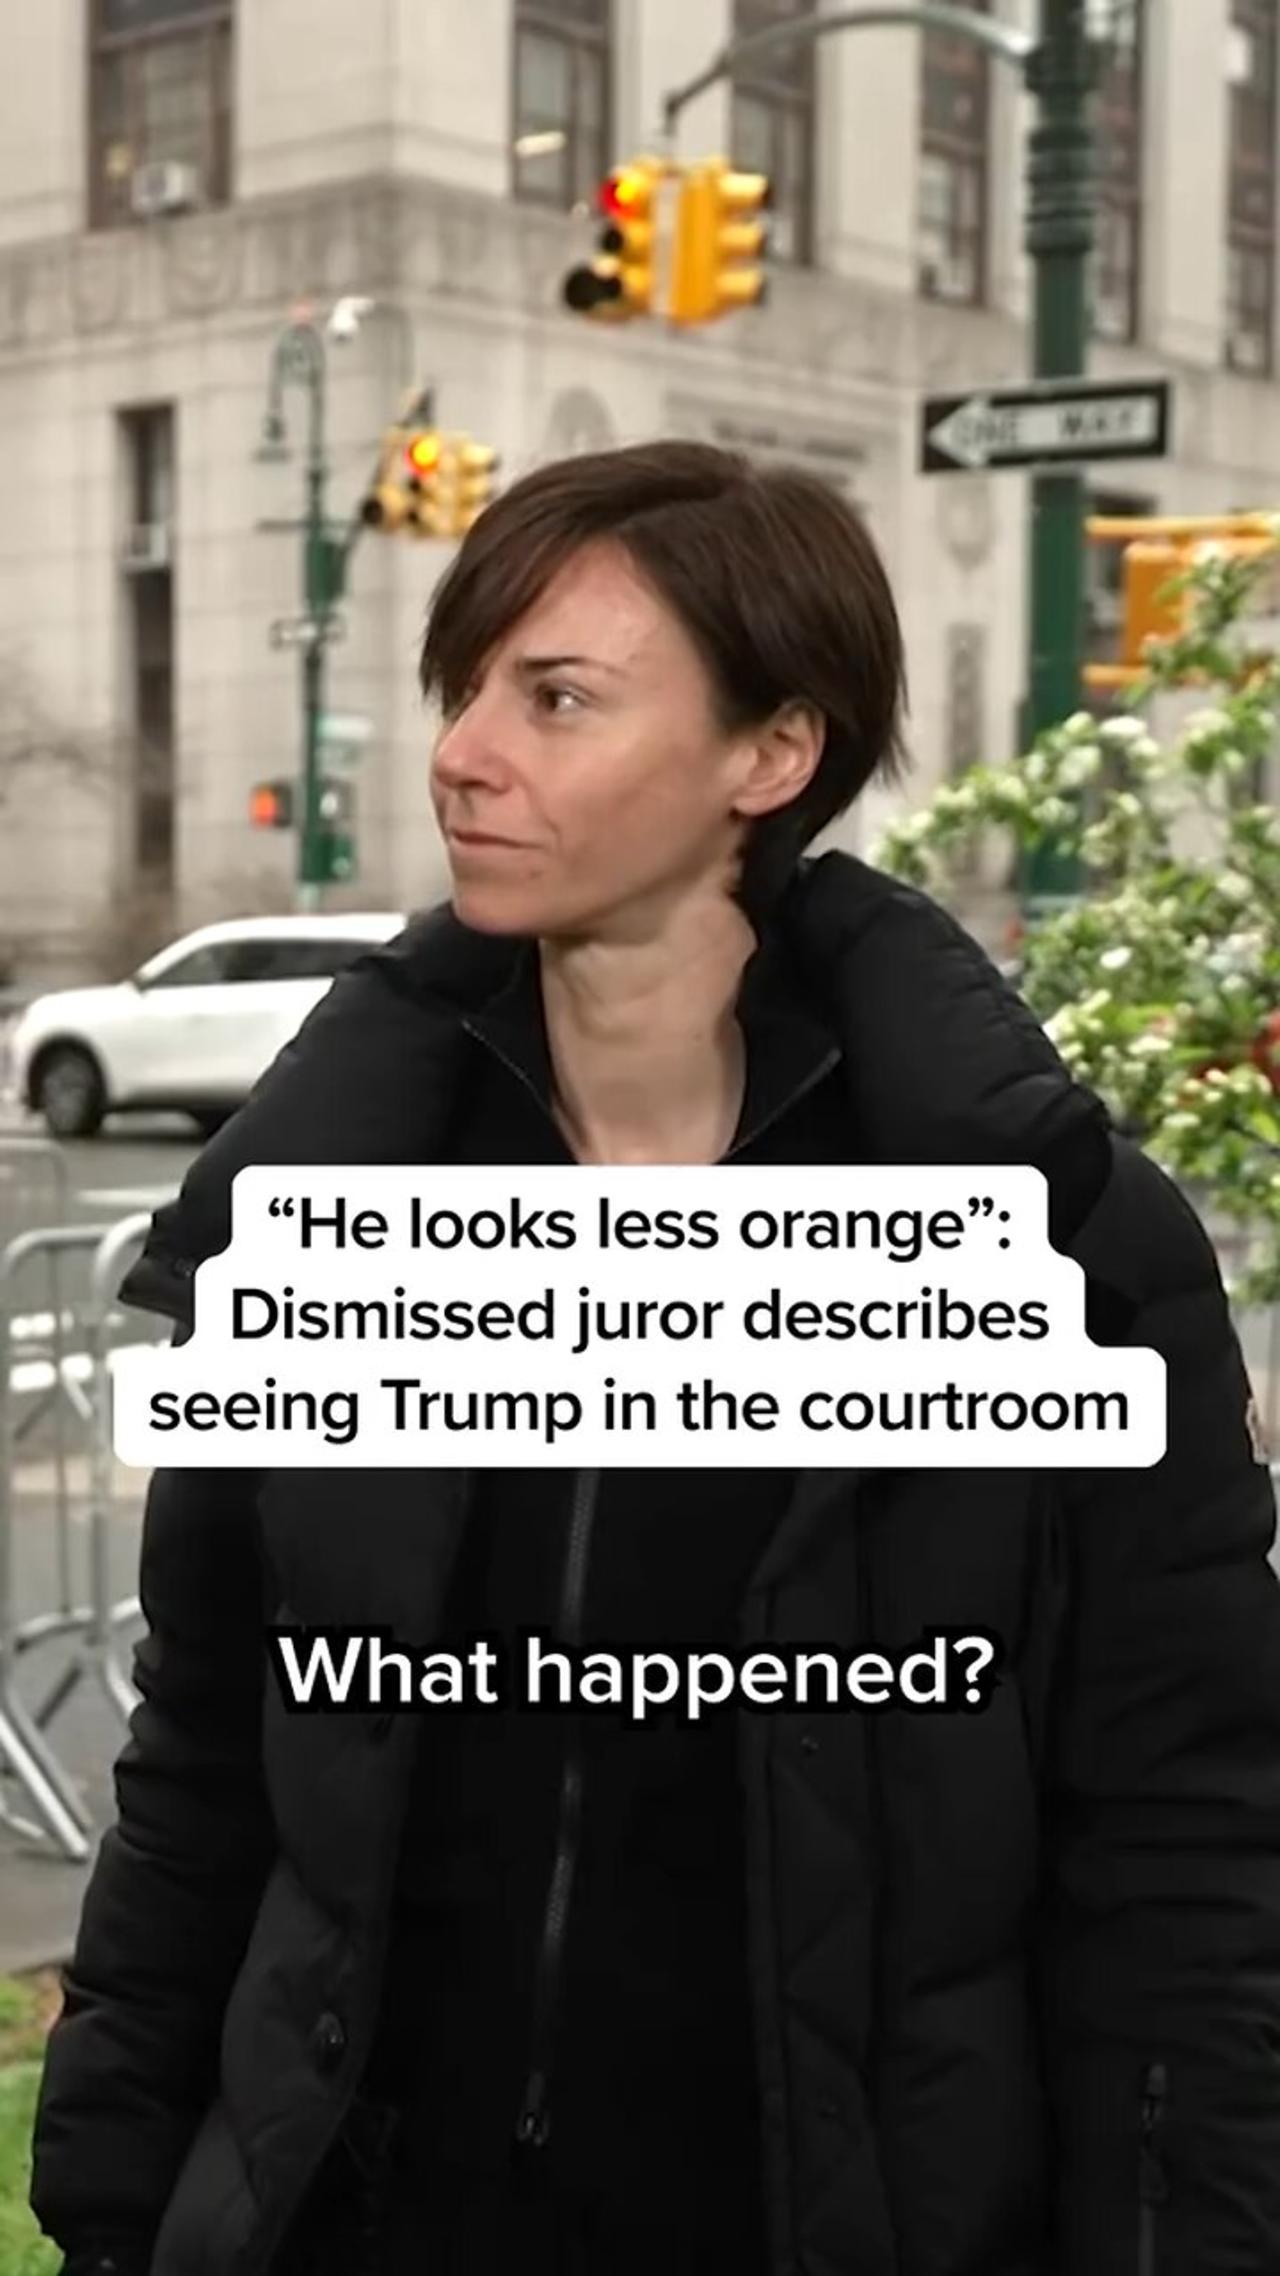 These TDS juror is insane!